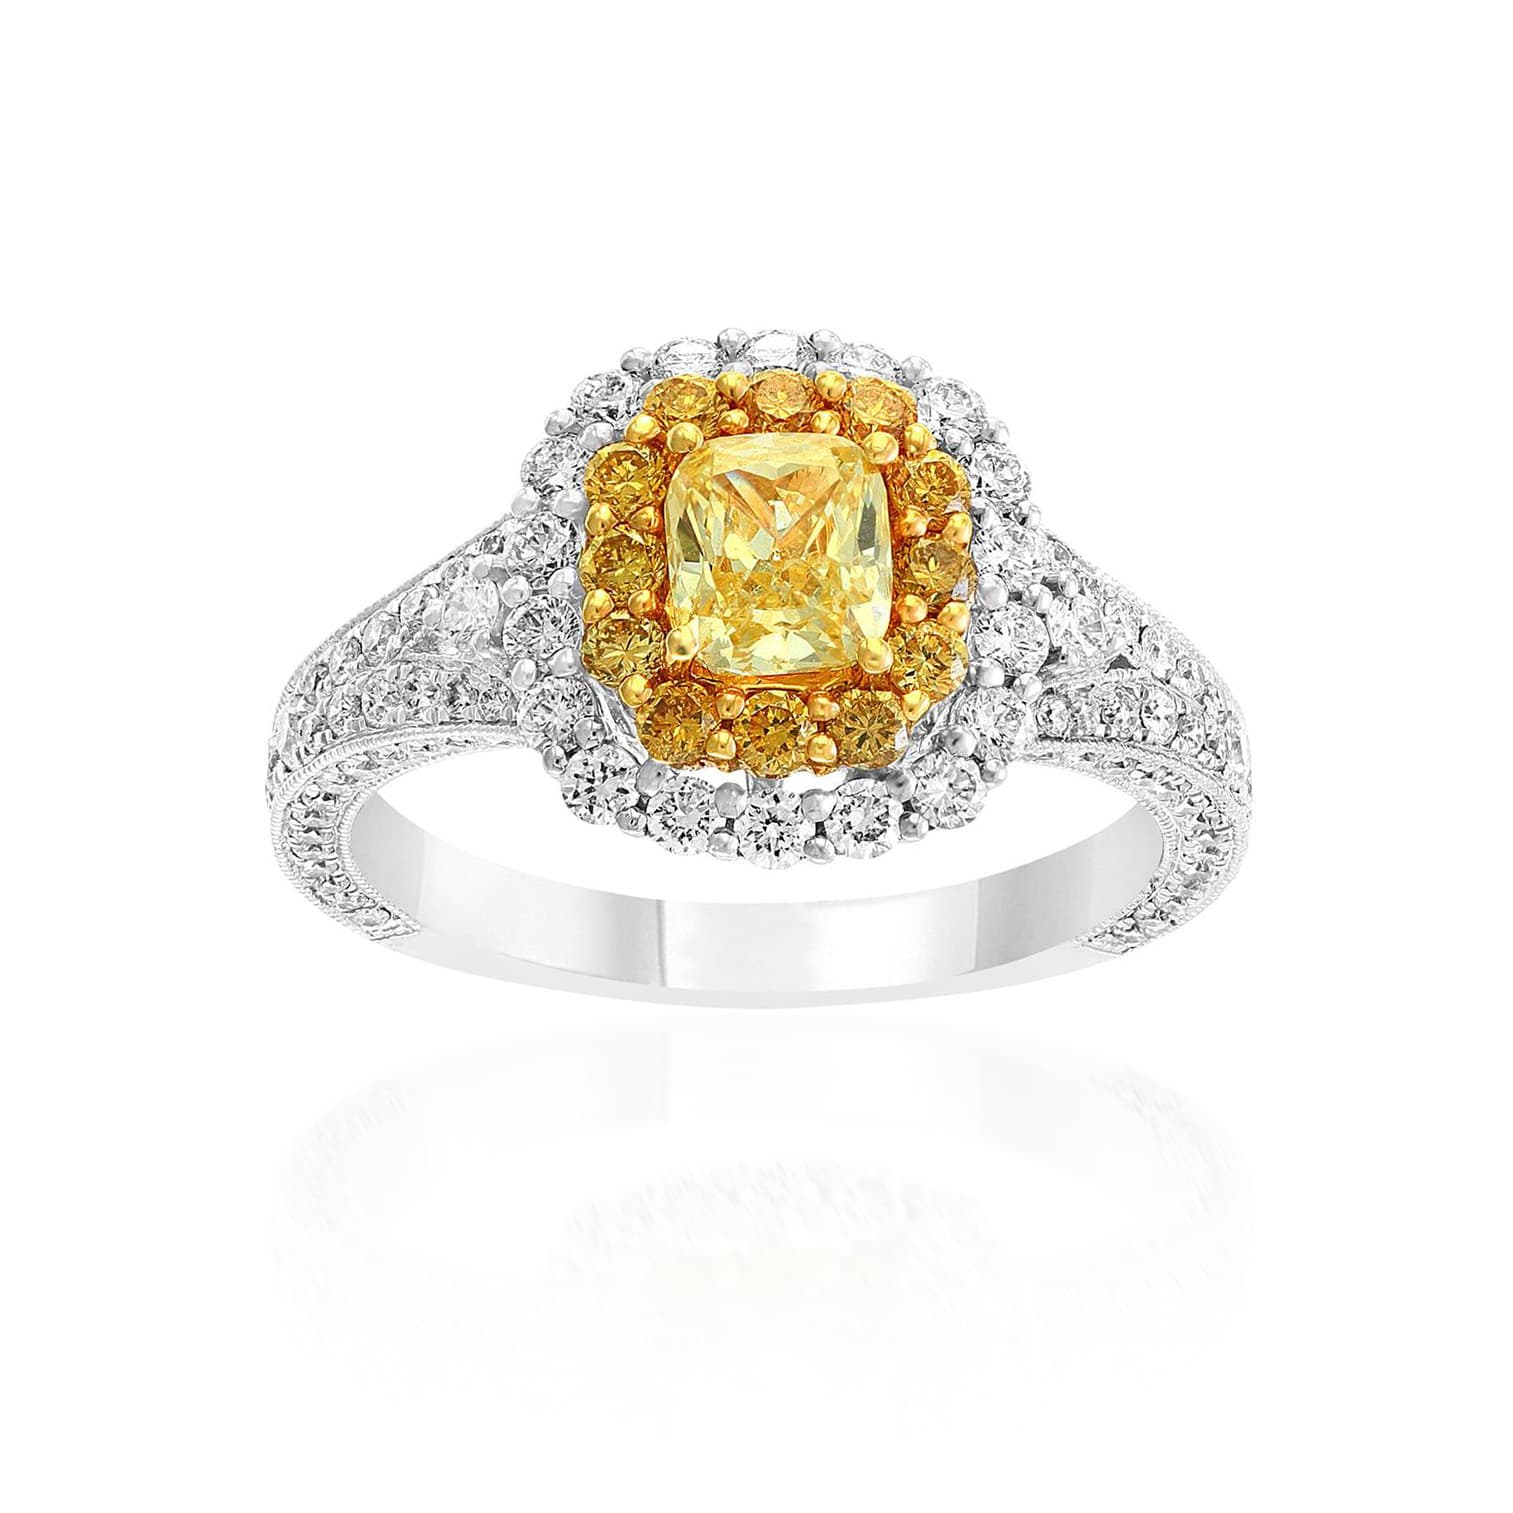 Cushion Halo Engagement Ring with 1.01 CT Fancy Yellow Center Diamond 0